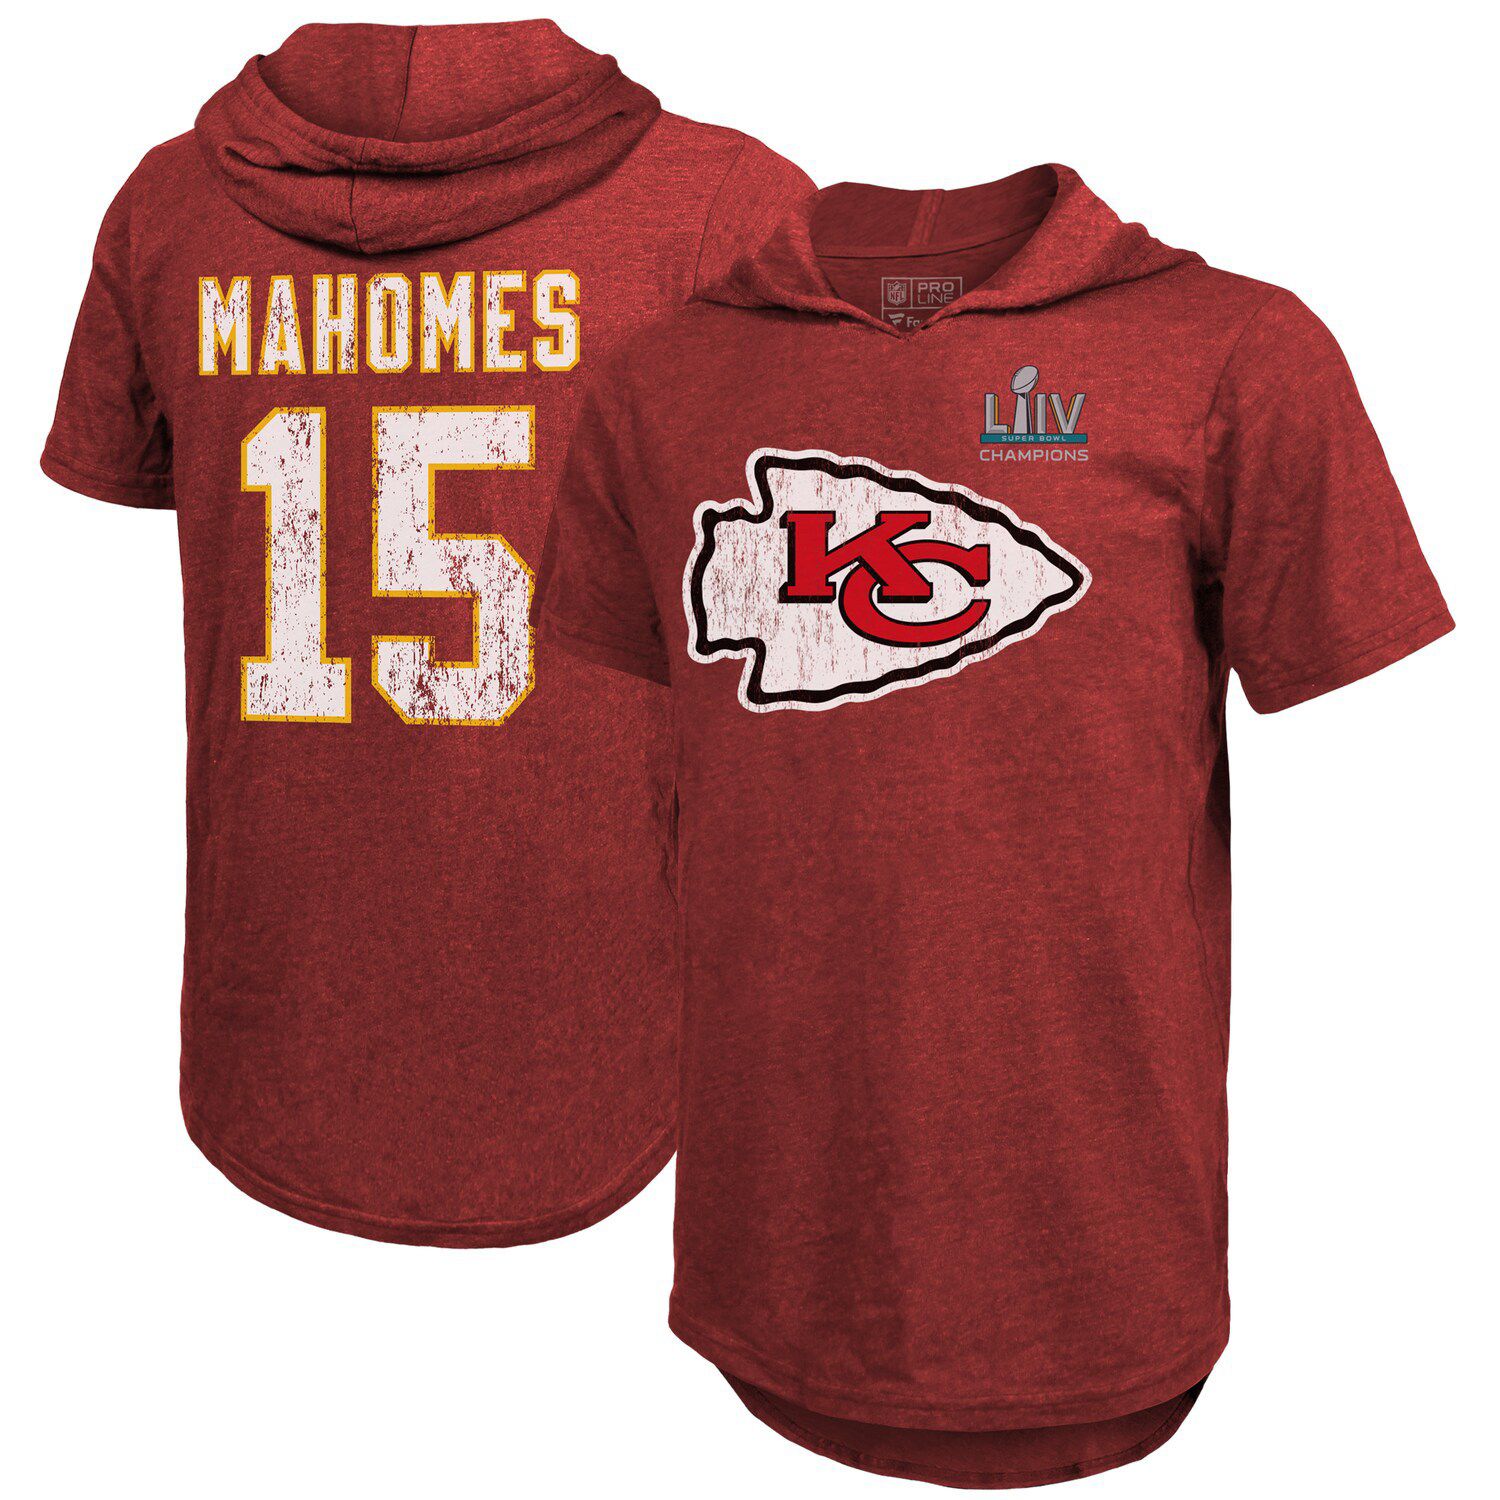 mahomes red super bowl jersey